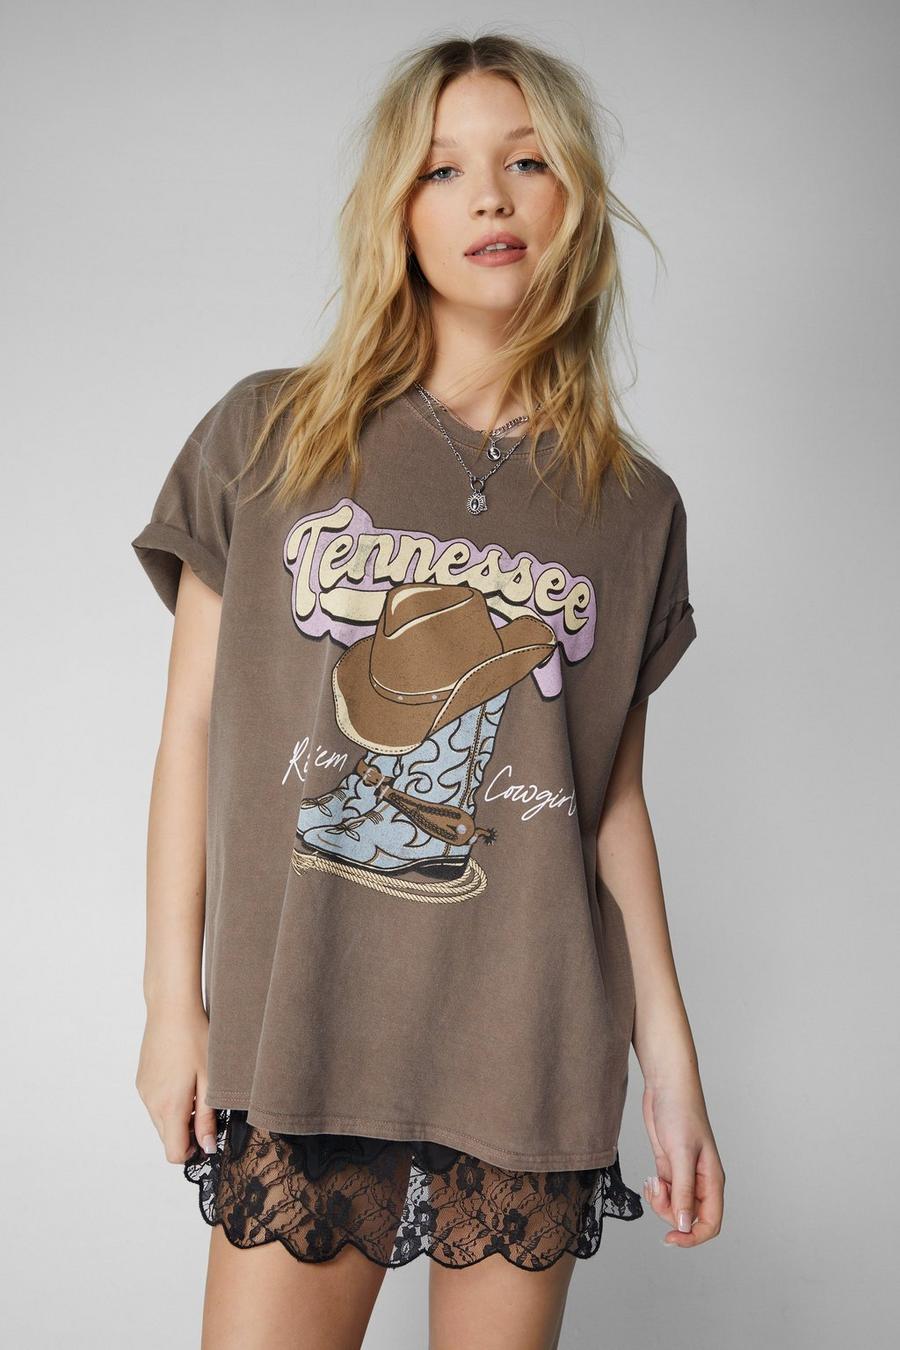 Tennessee Washed Front Graphic T-shirt